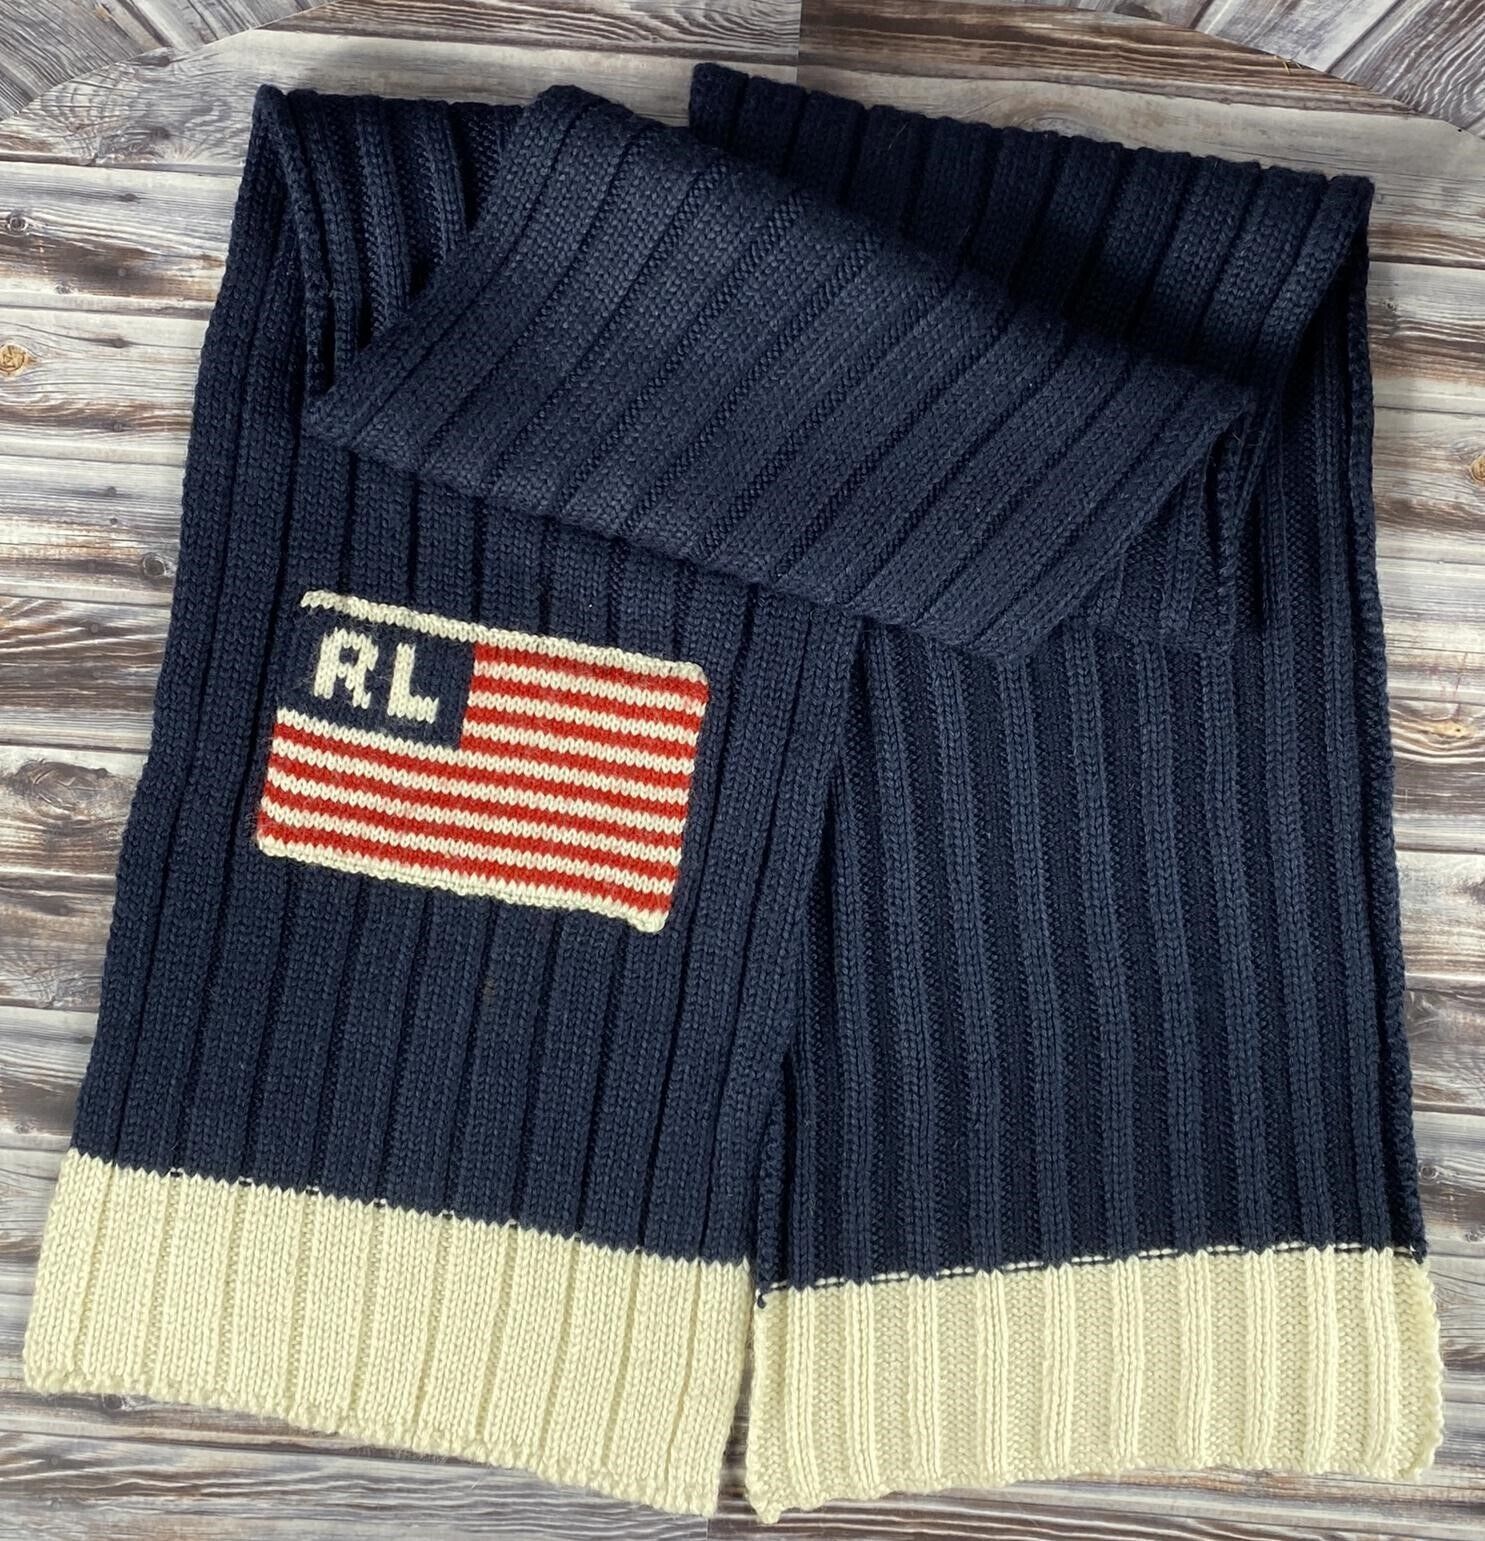 Ralph Lauren Polo Jeans Co. Knit Winter Scarf - American Flag - 65 x 9 inches - $38.69